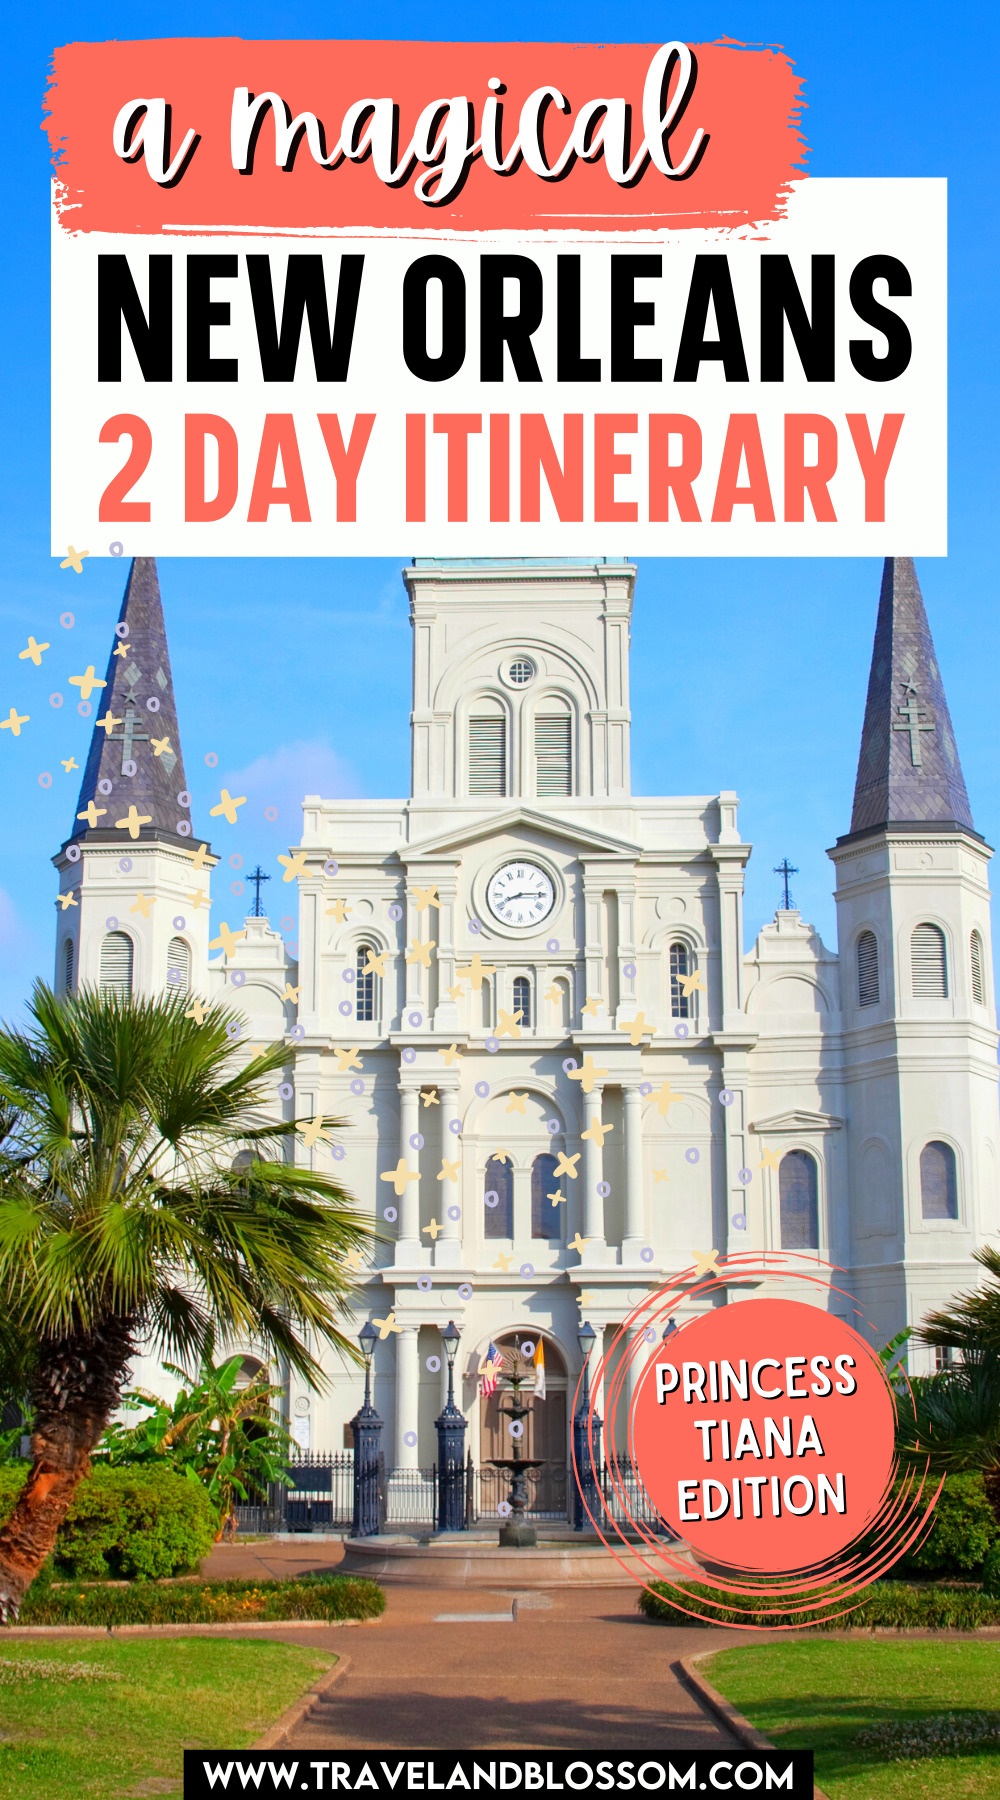 2 Day New Orleans Itinerary: Princess Tiana Edition